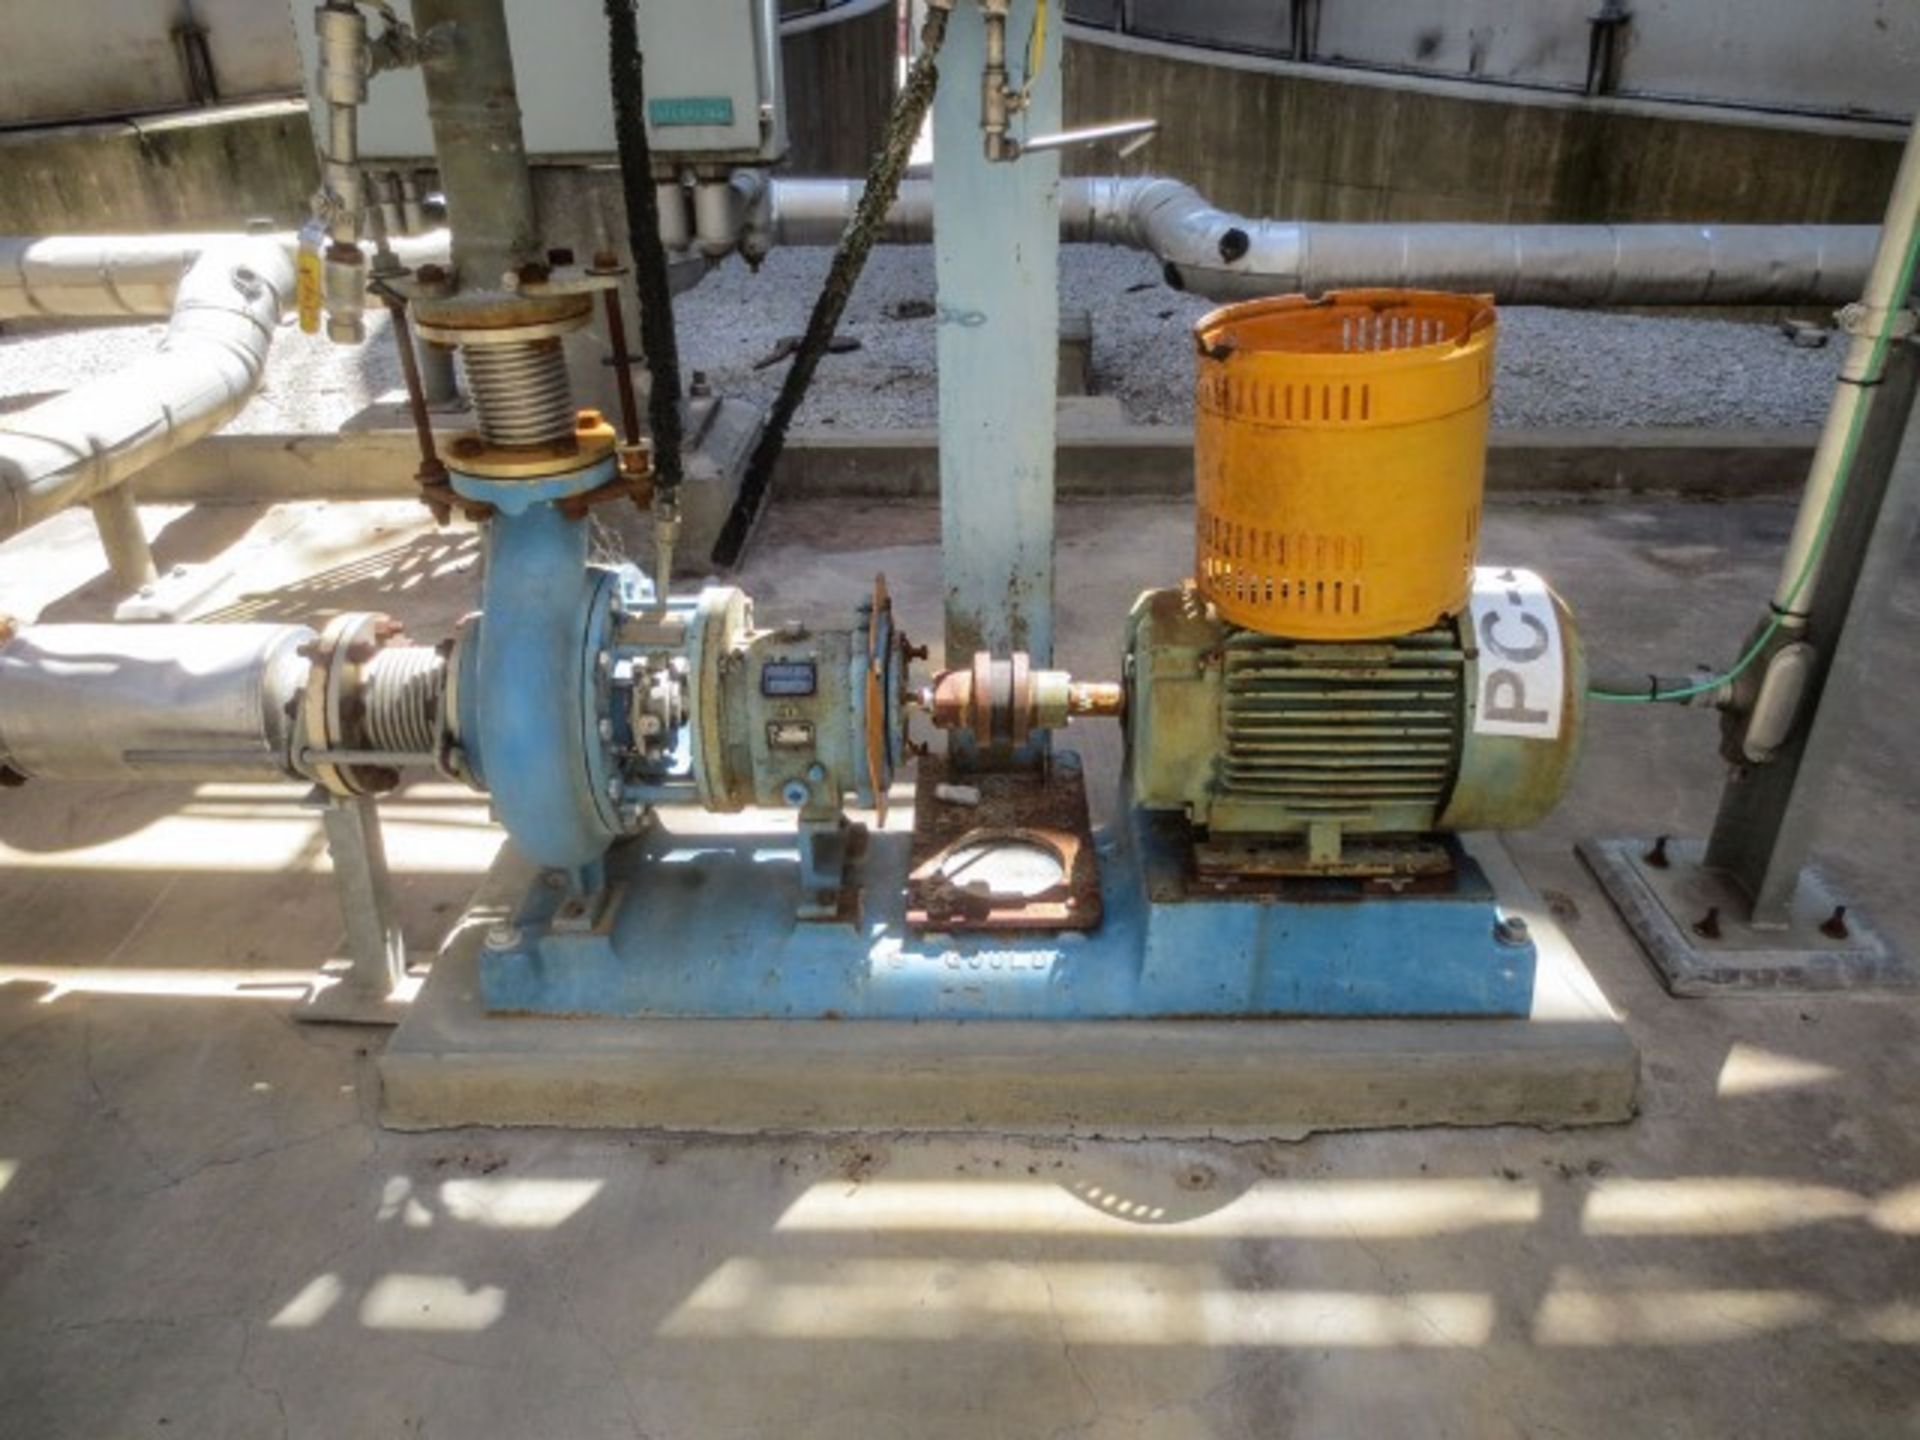 Goulds centrifugal pump, model 3196 MTX. Stainless Steel 316; Size 3X4- Rigging/Loading Fee: $650